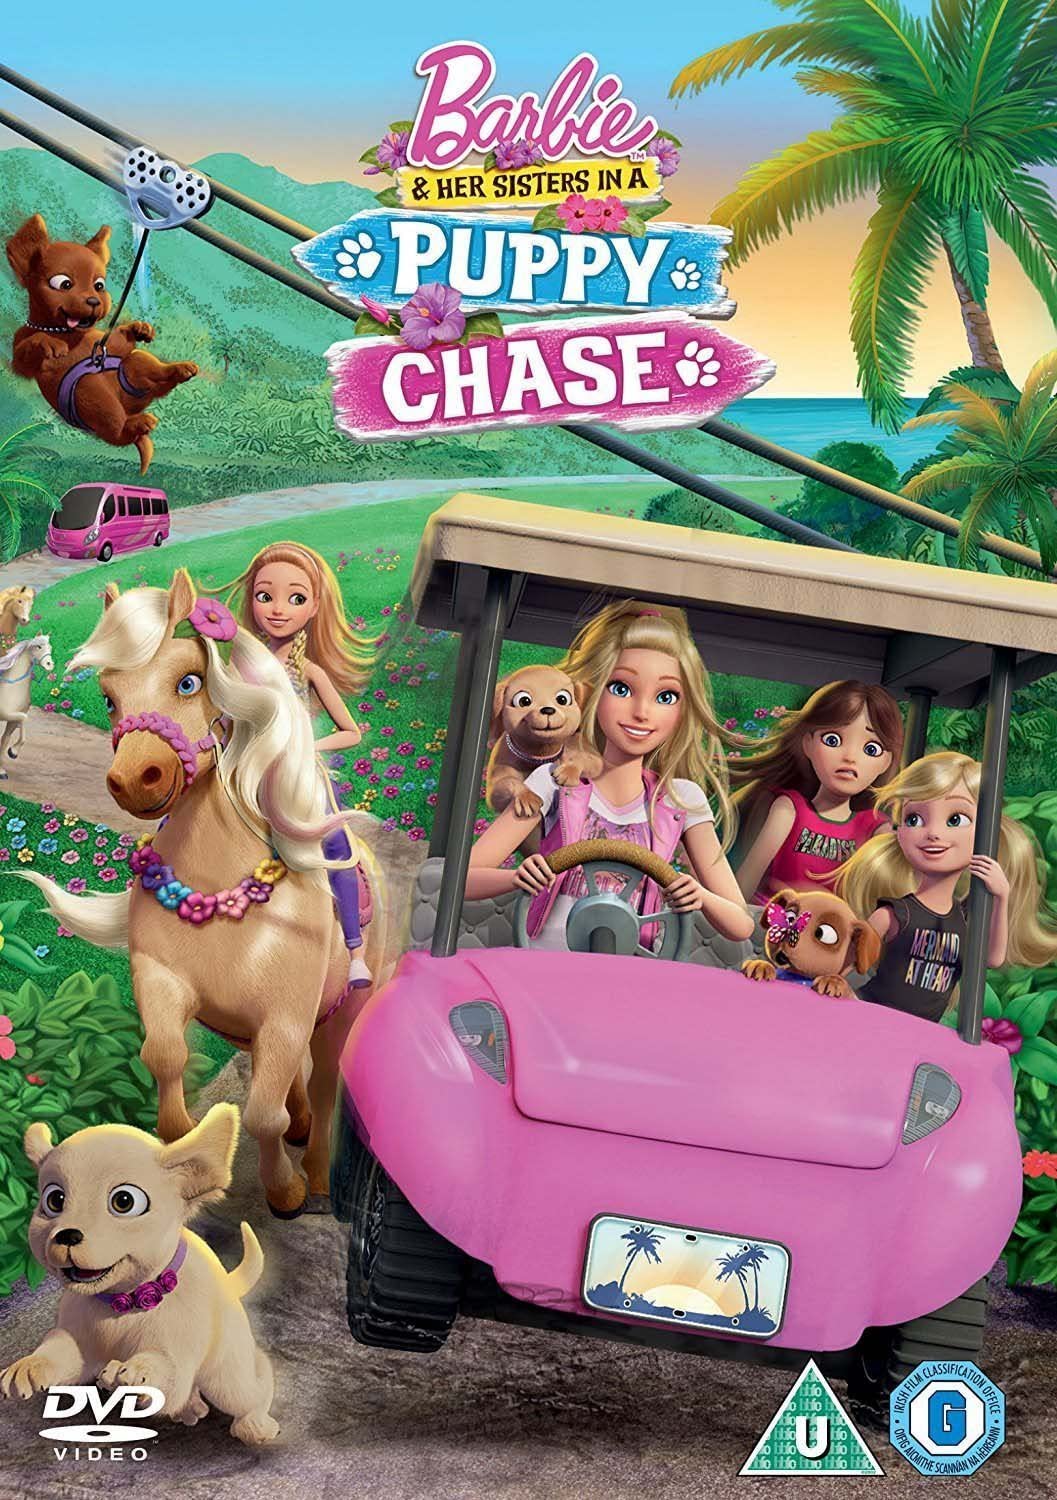 Barbie: Puppy Chase [Includes Gift] (DVD)